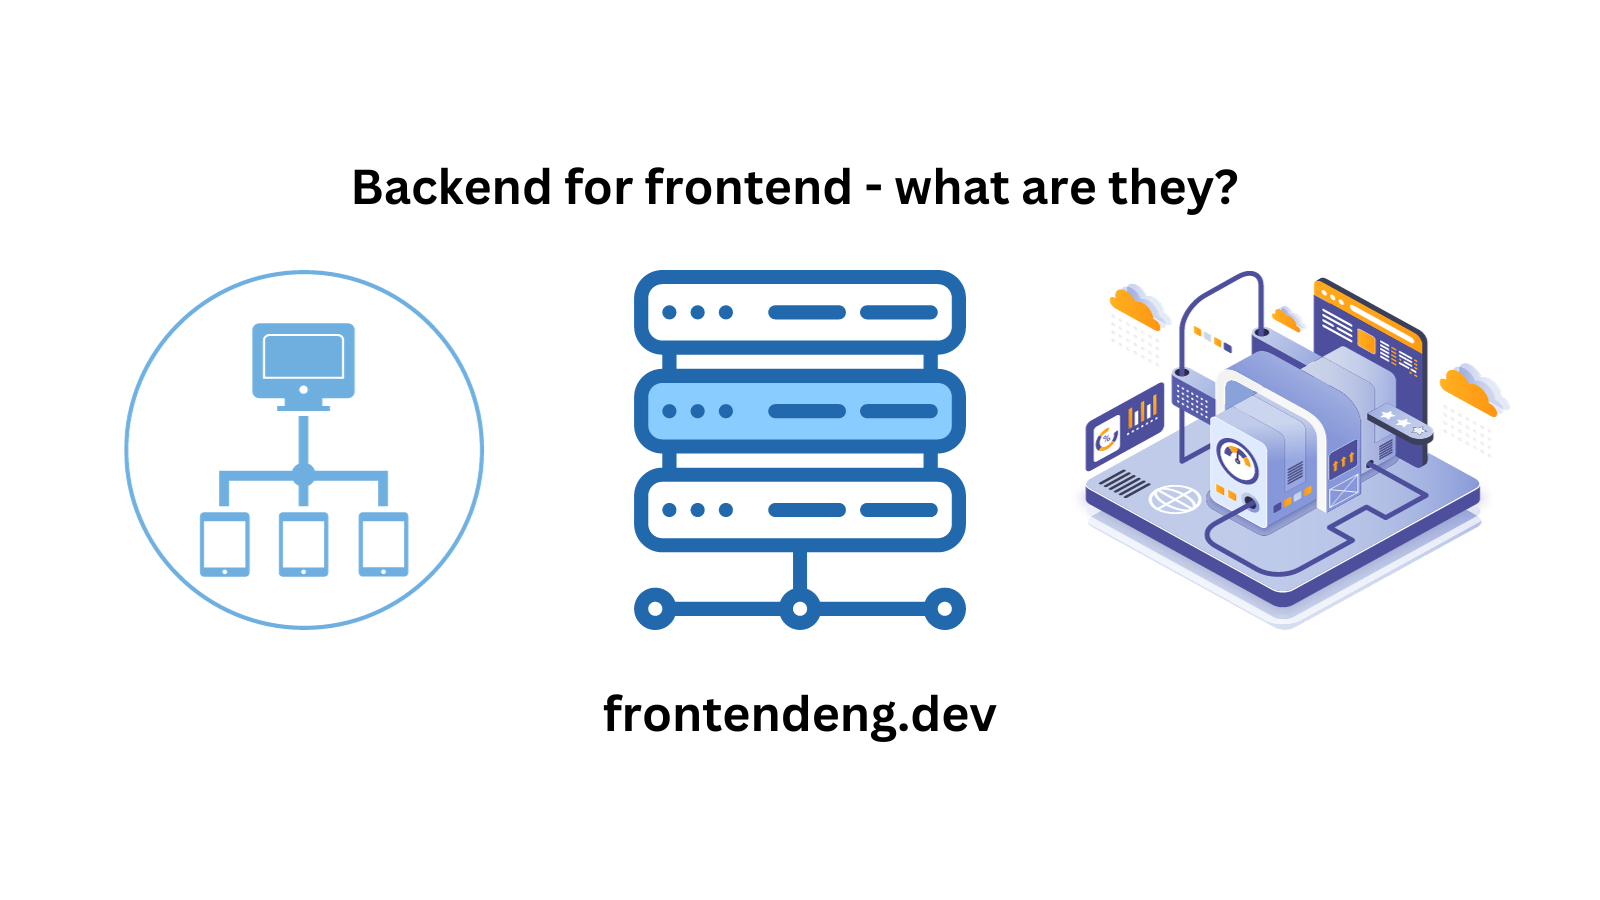 Backend for frontend or BFF design pattern.